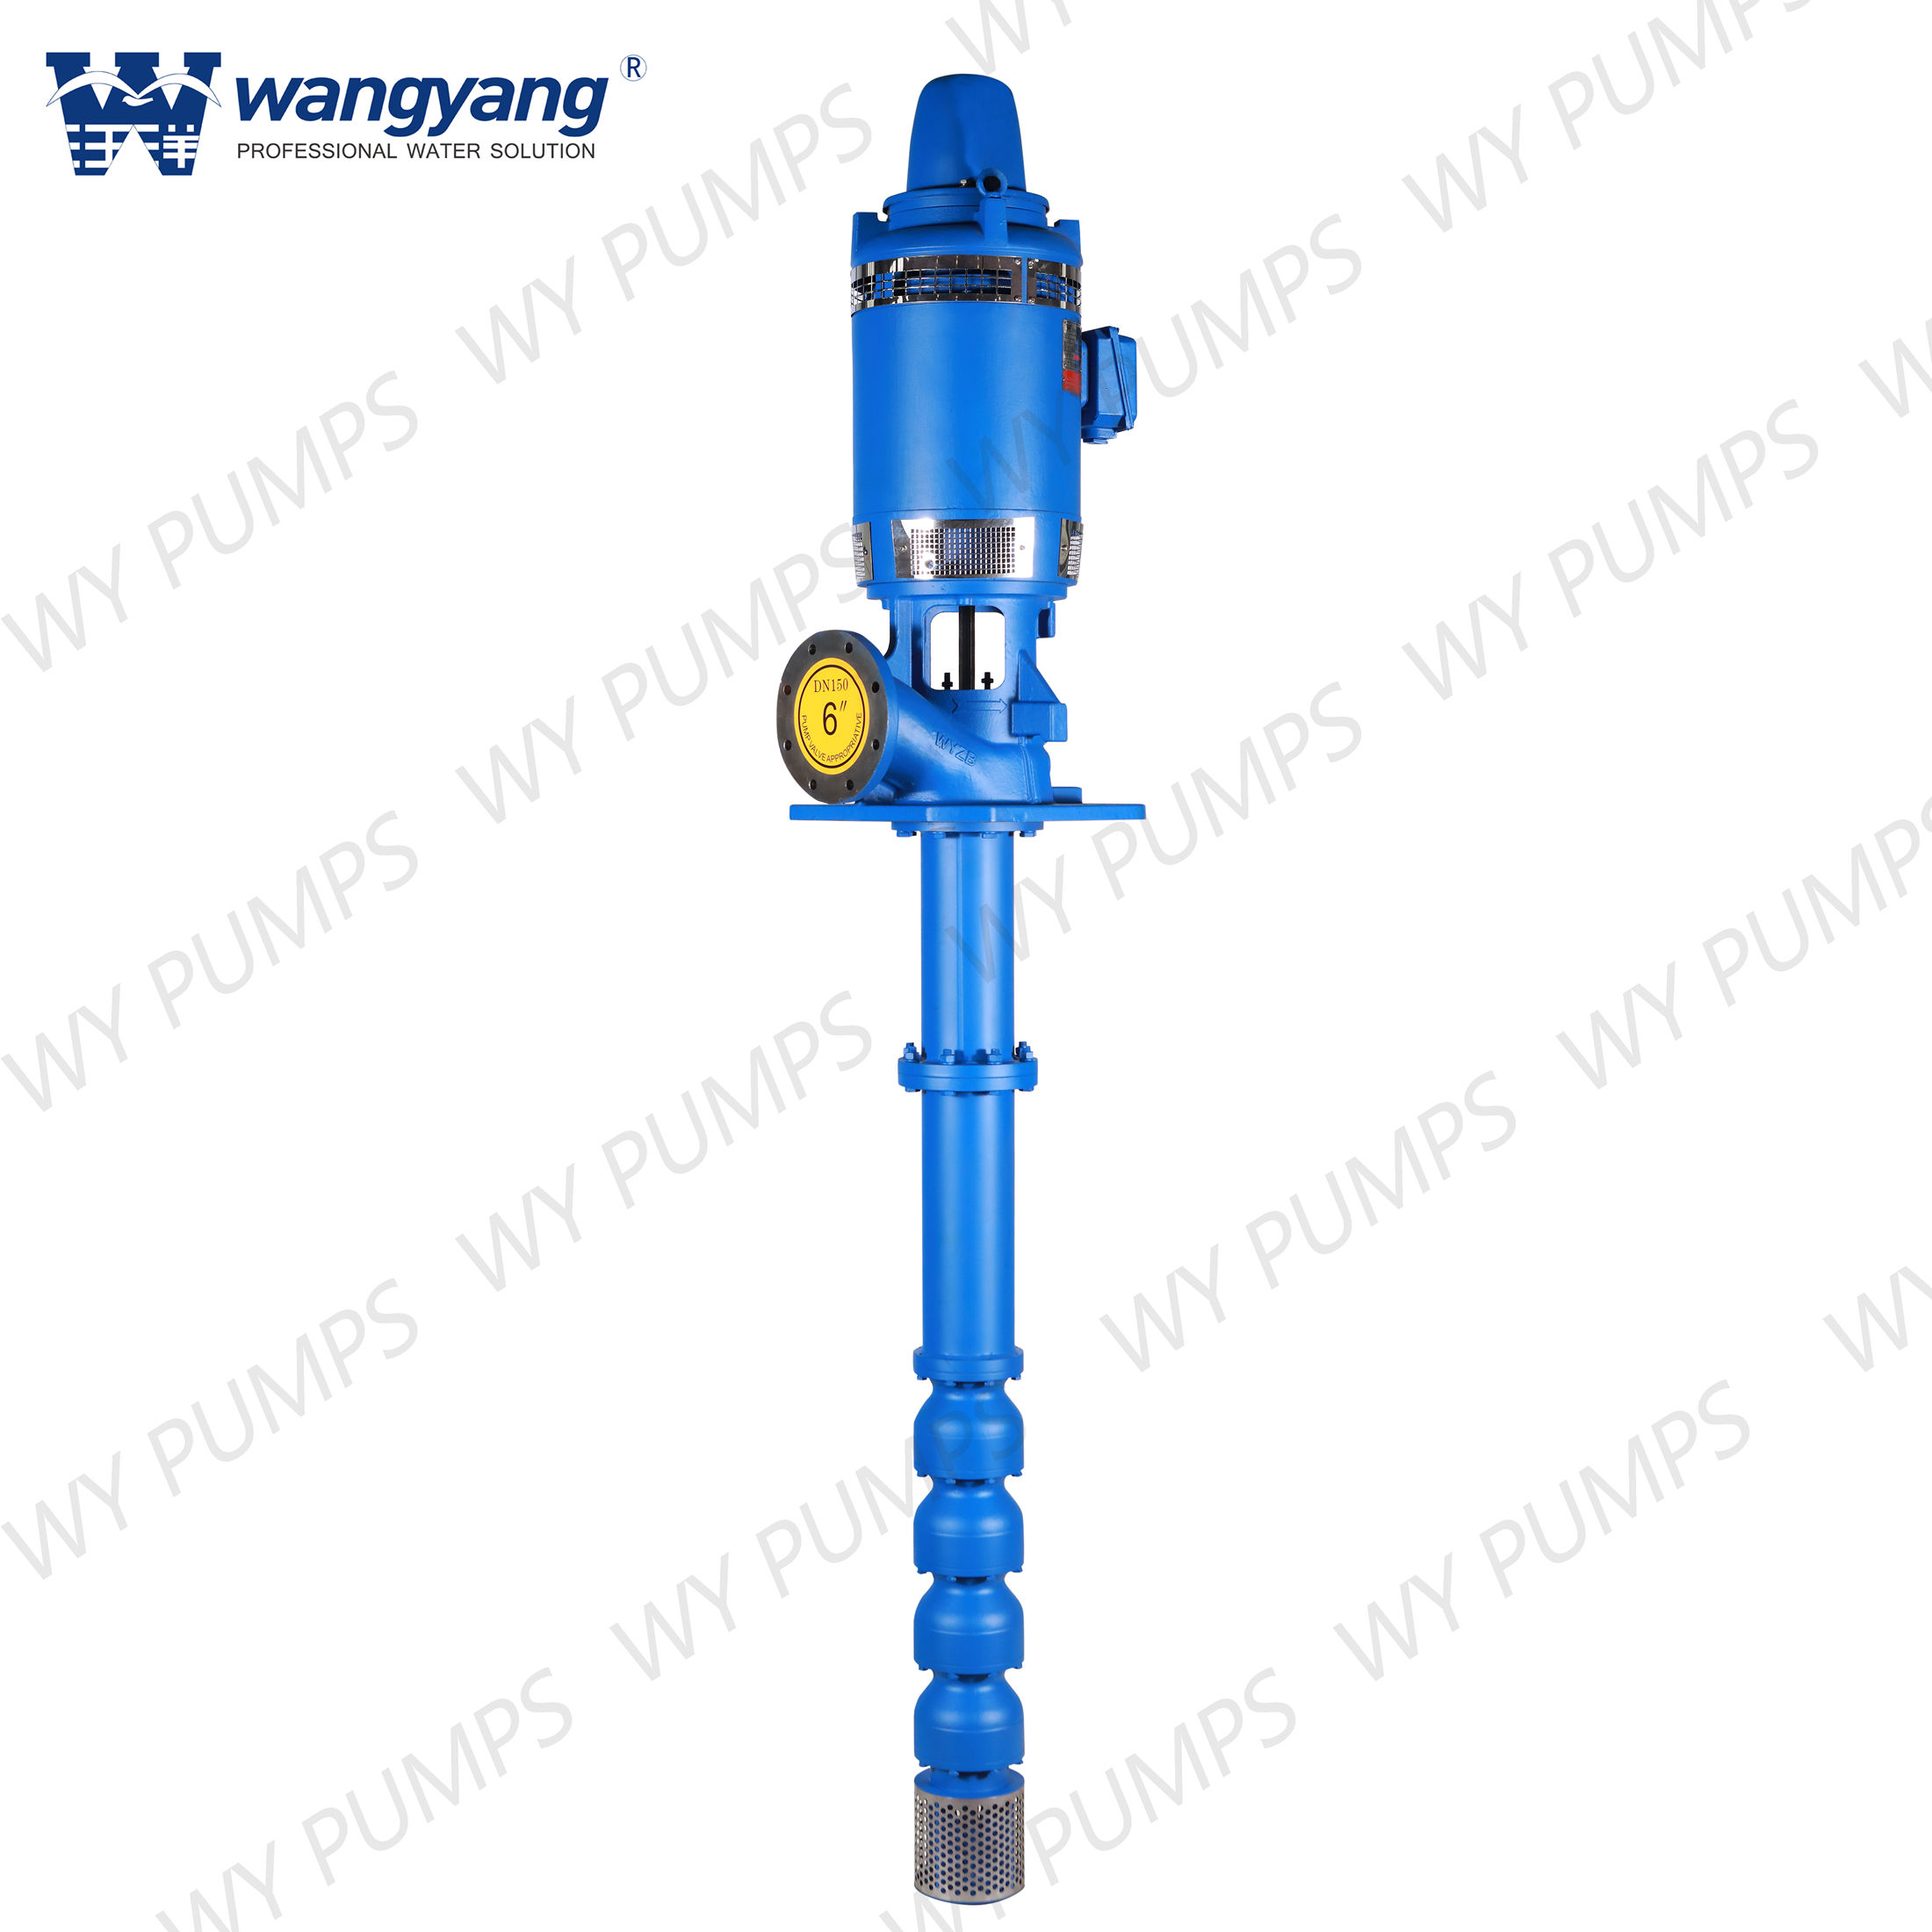 Axial Flow Vertical Turbine Pump with Hollow Shaft Motor